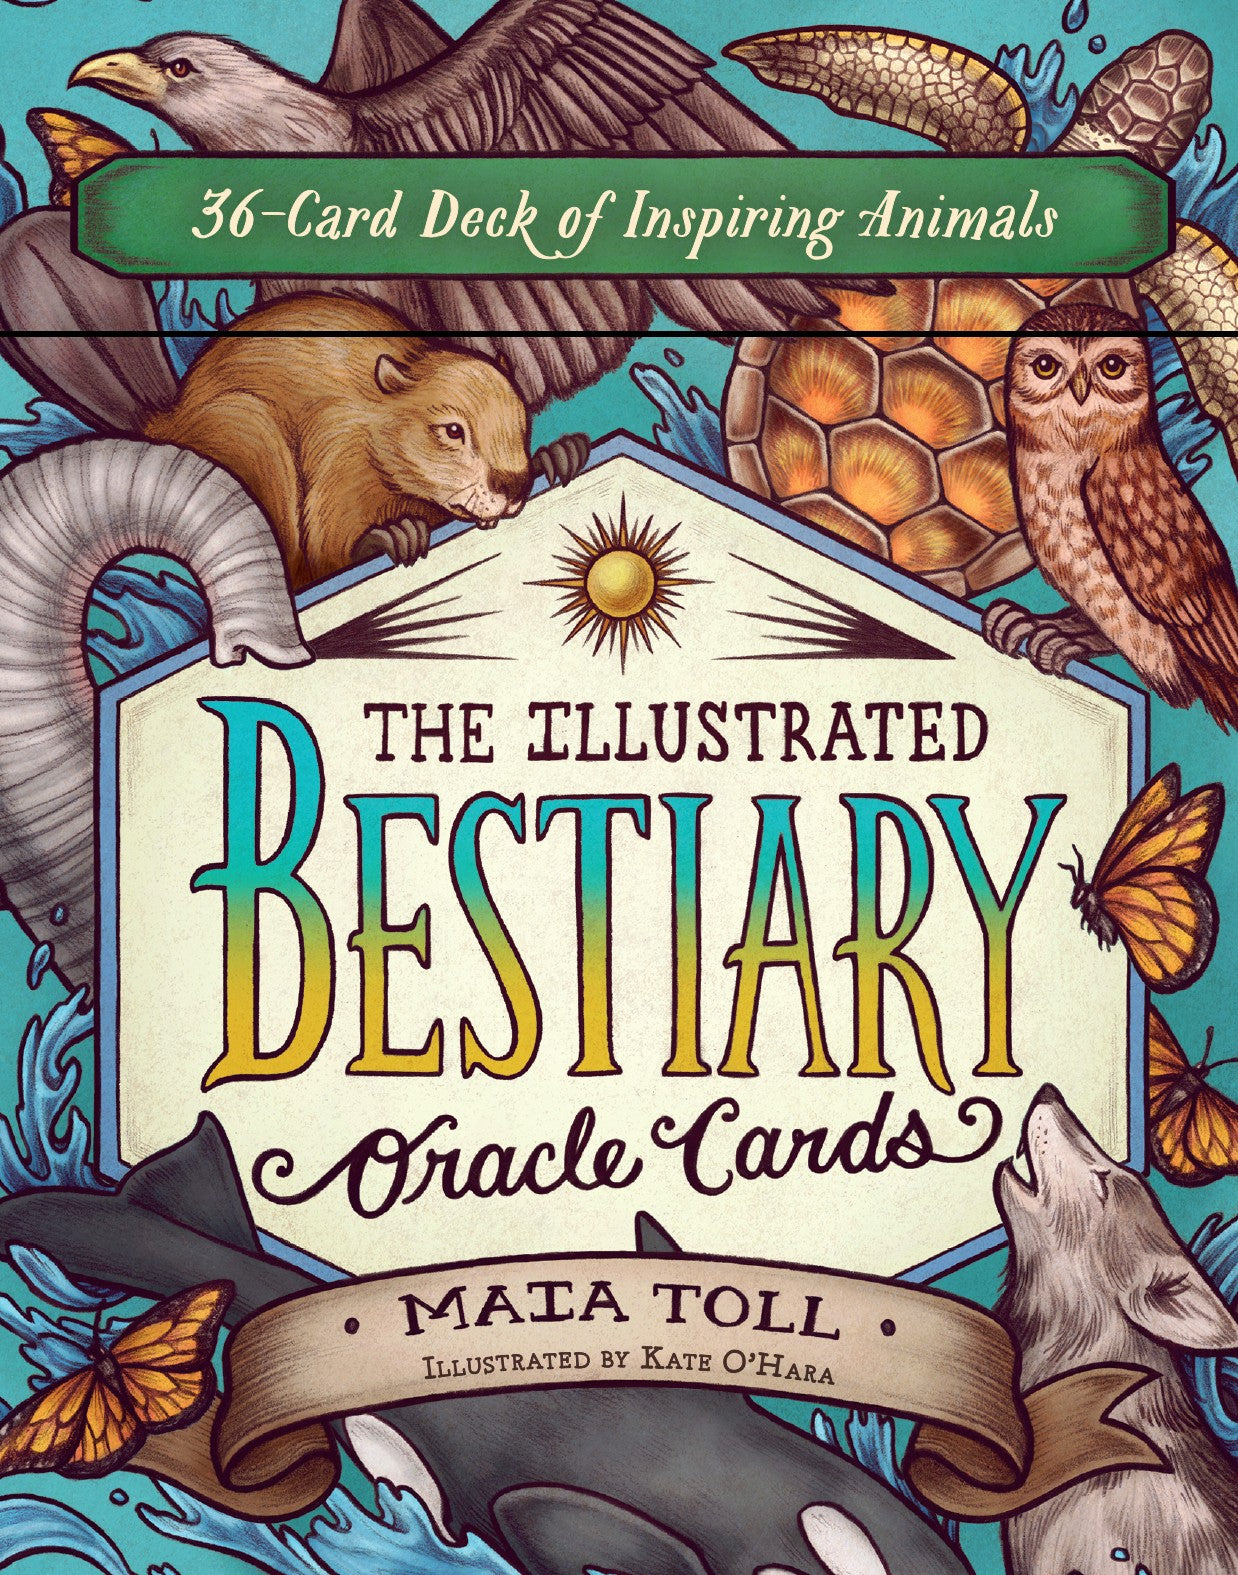 The Illustrated Bestiary Oracle Cards 36-Card Deck of Inspiring Animals